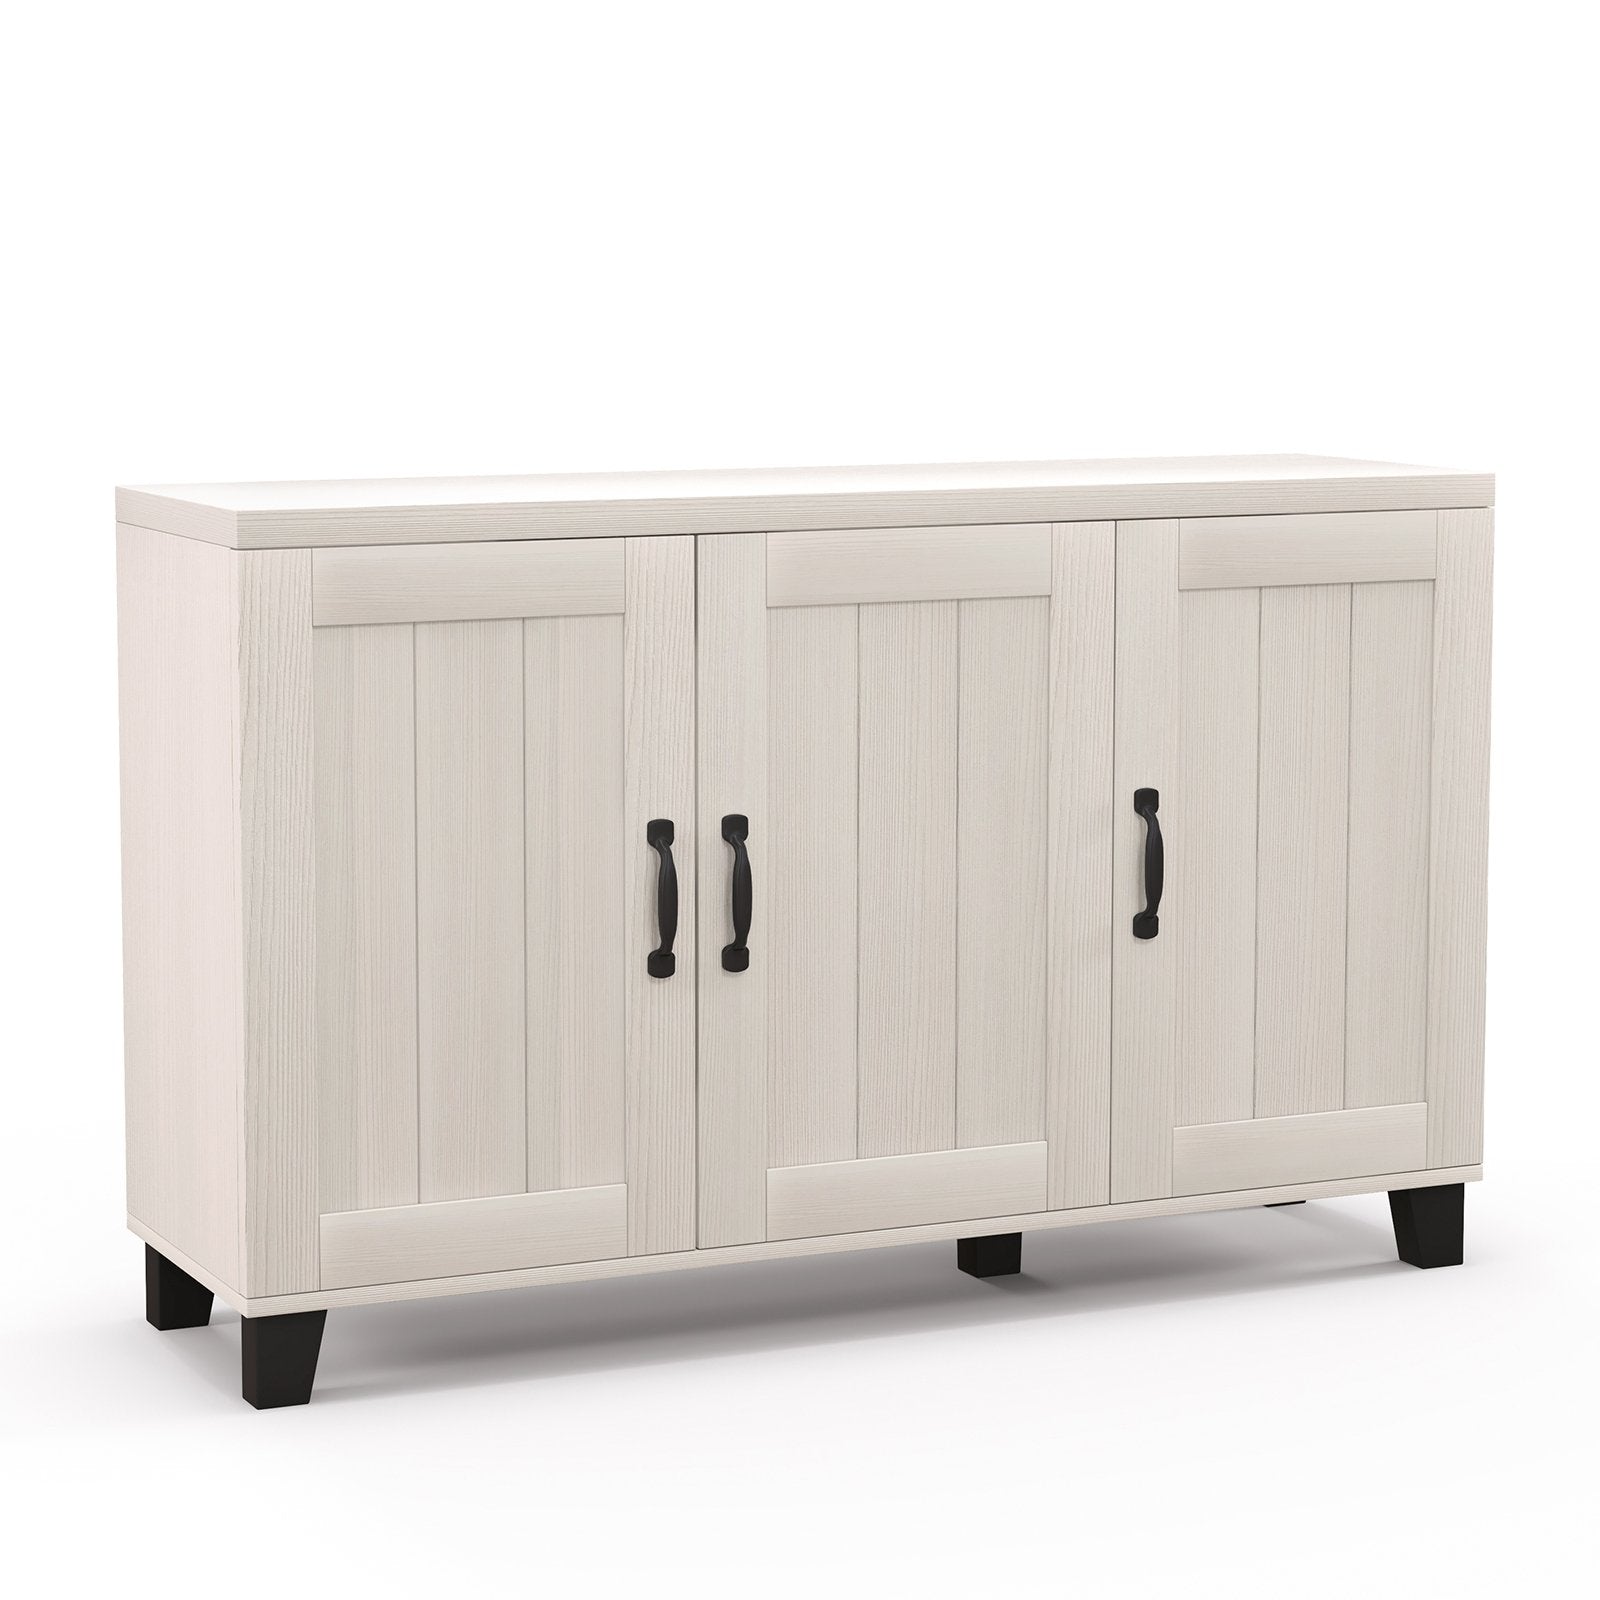 3-Door Buffet Sideboard with Adjustable Shelves and Anti-Tipping Kits-White Wash, White - Gallery Canada